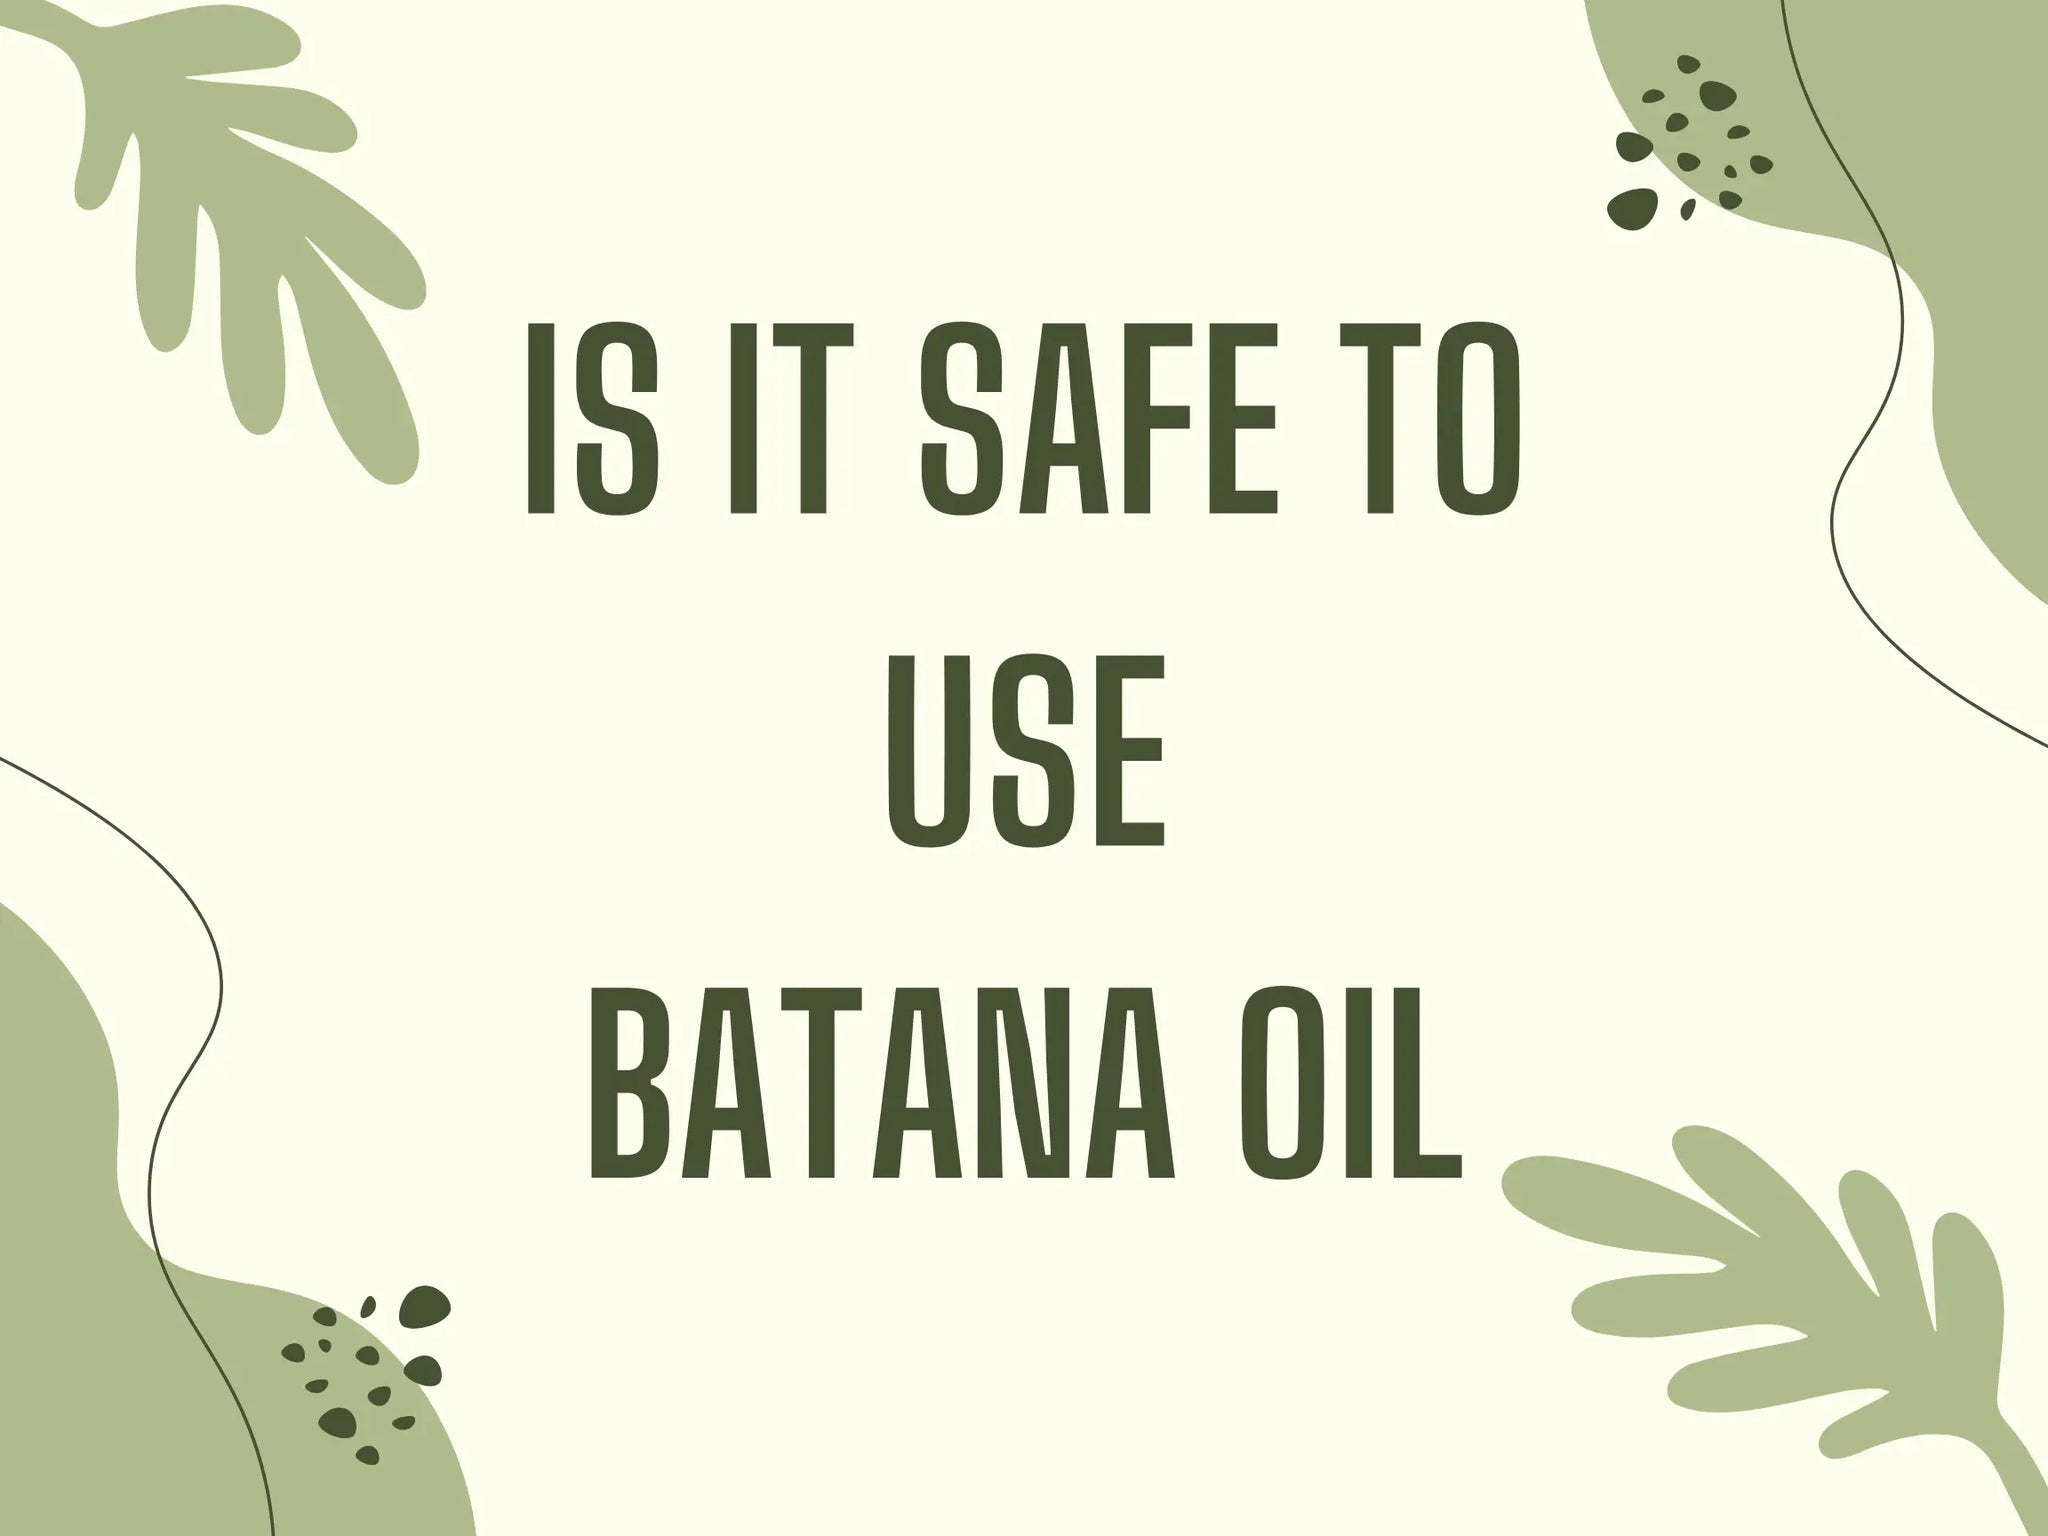 Unveiling the Truth: Is It Safe To Use Batana Oil?